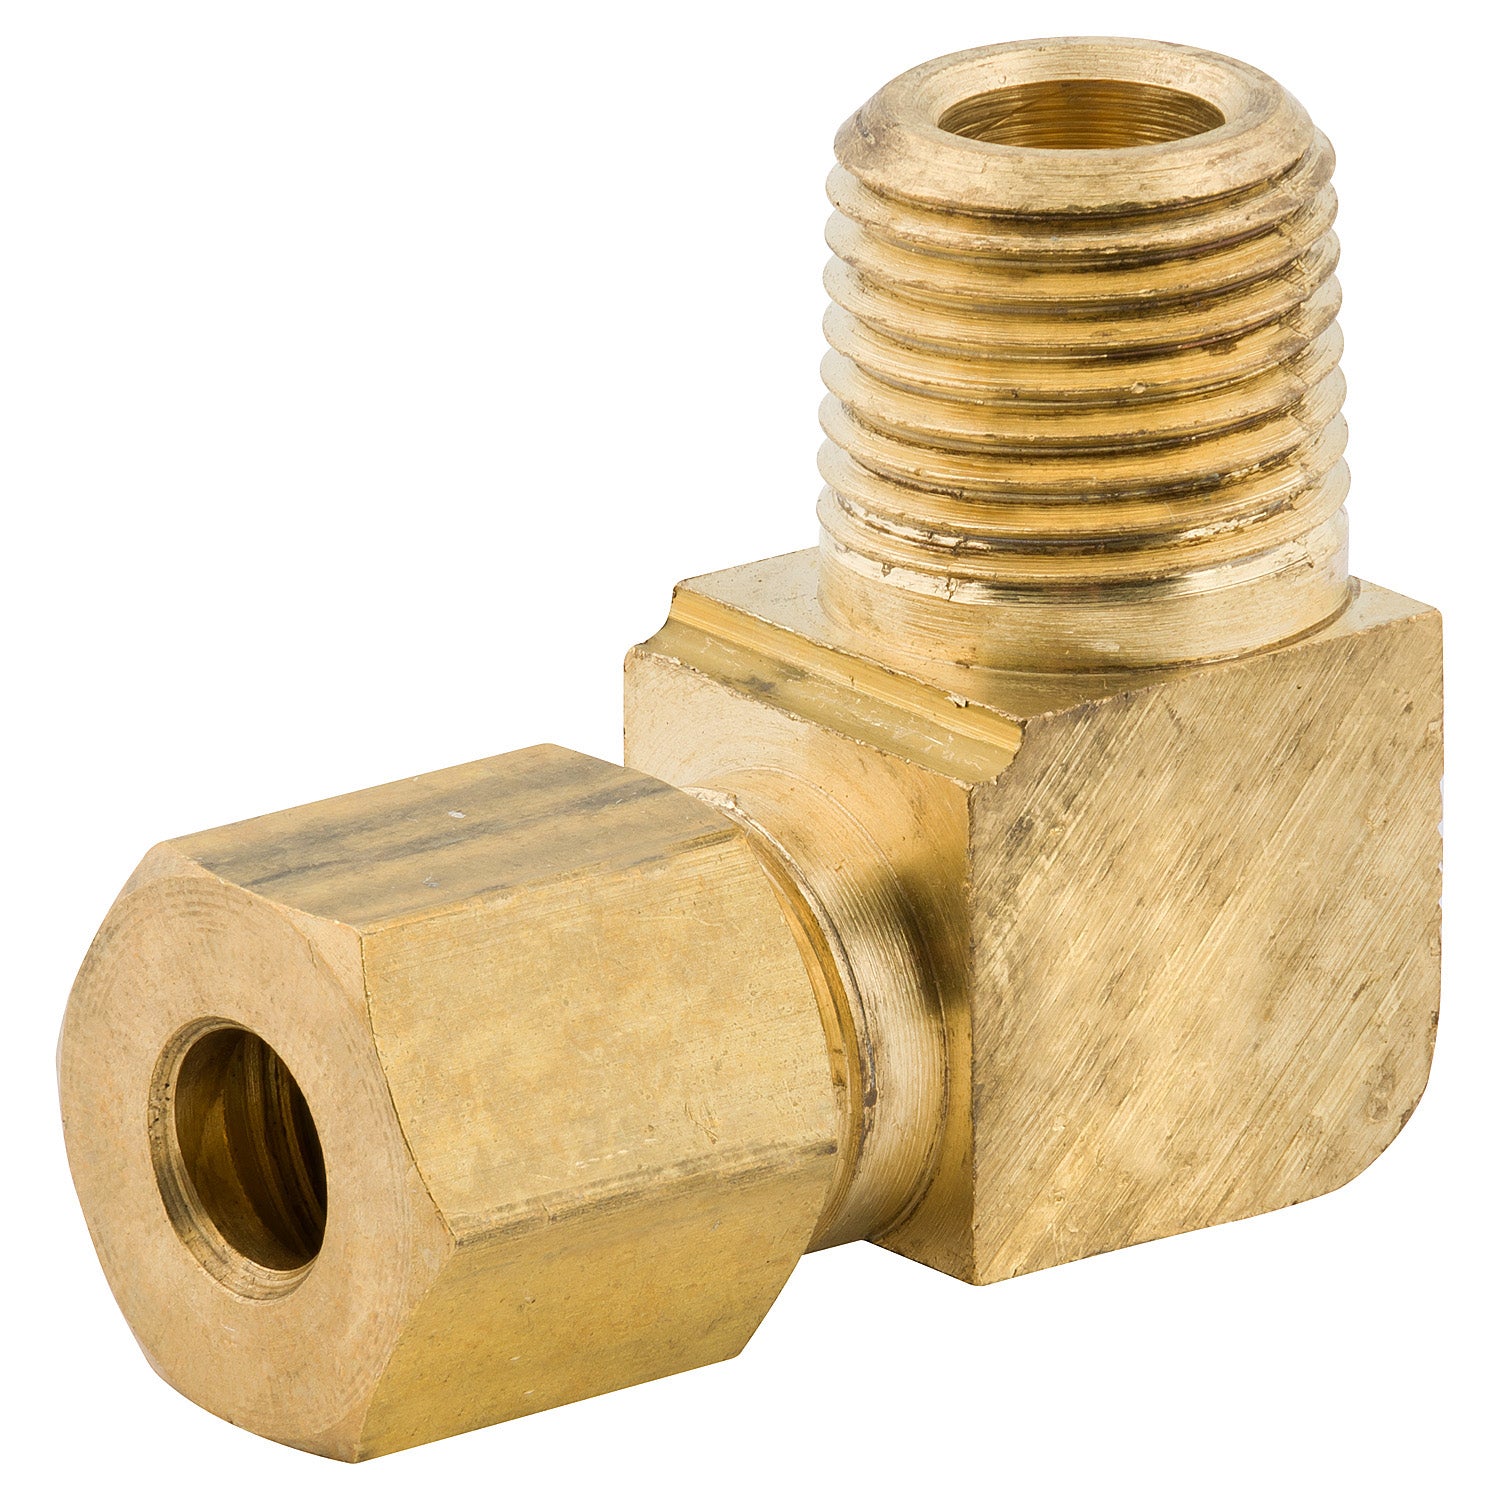 Elbow compression ring fitting R 3/8-10 (M16x1.5)mm, brass